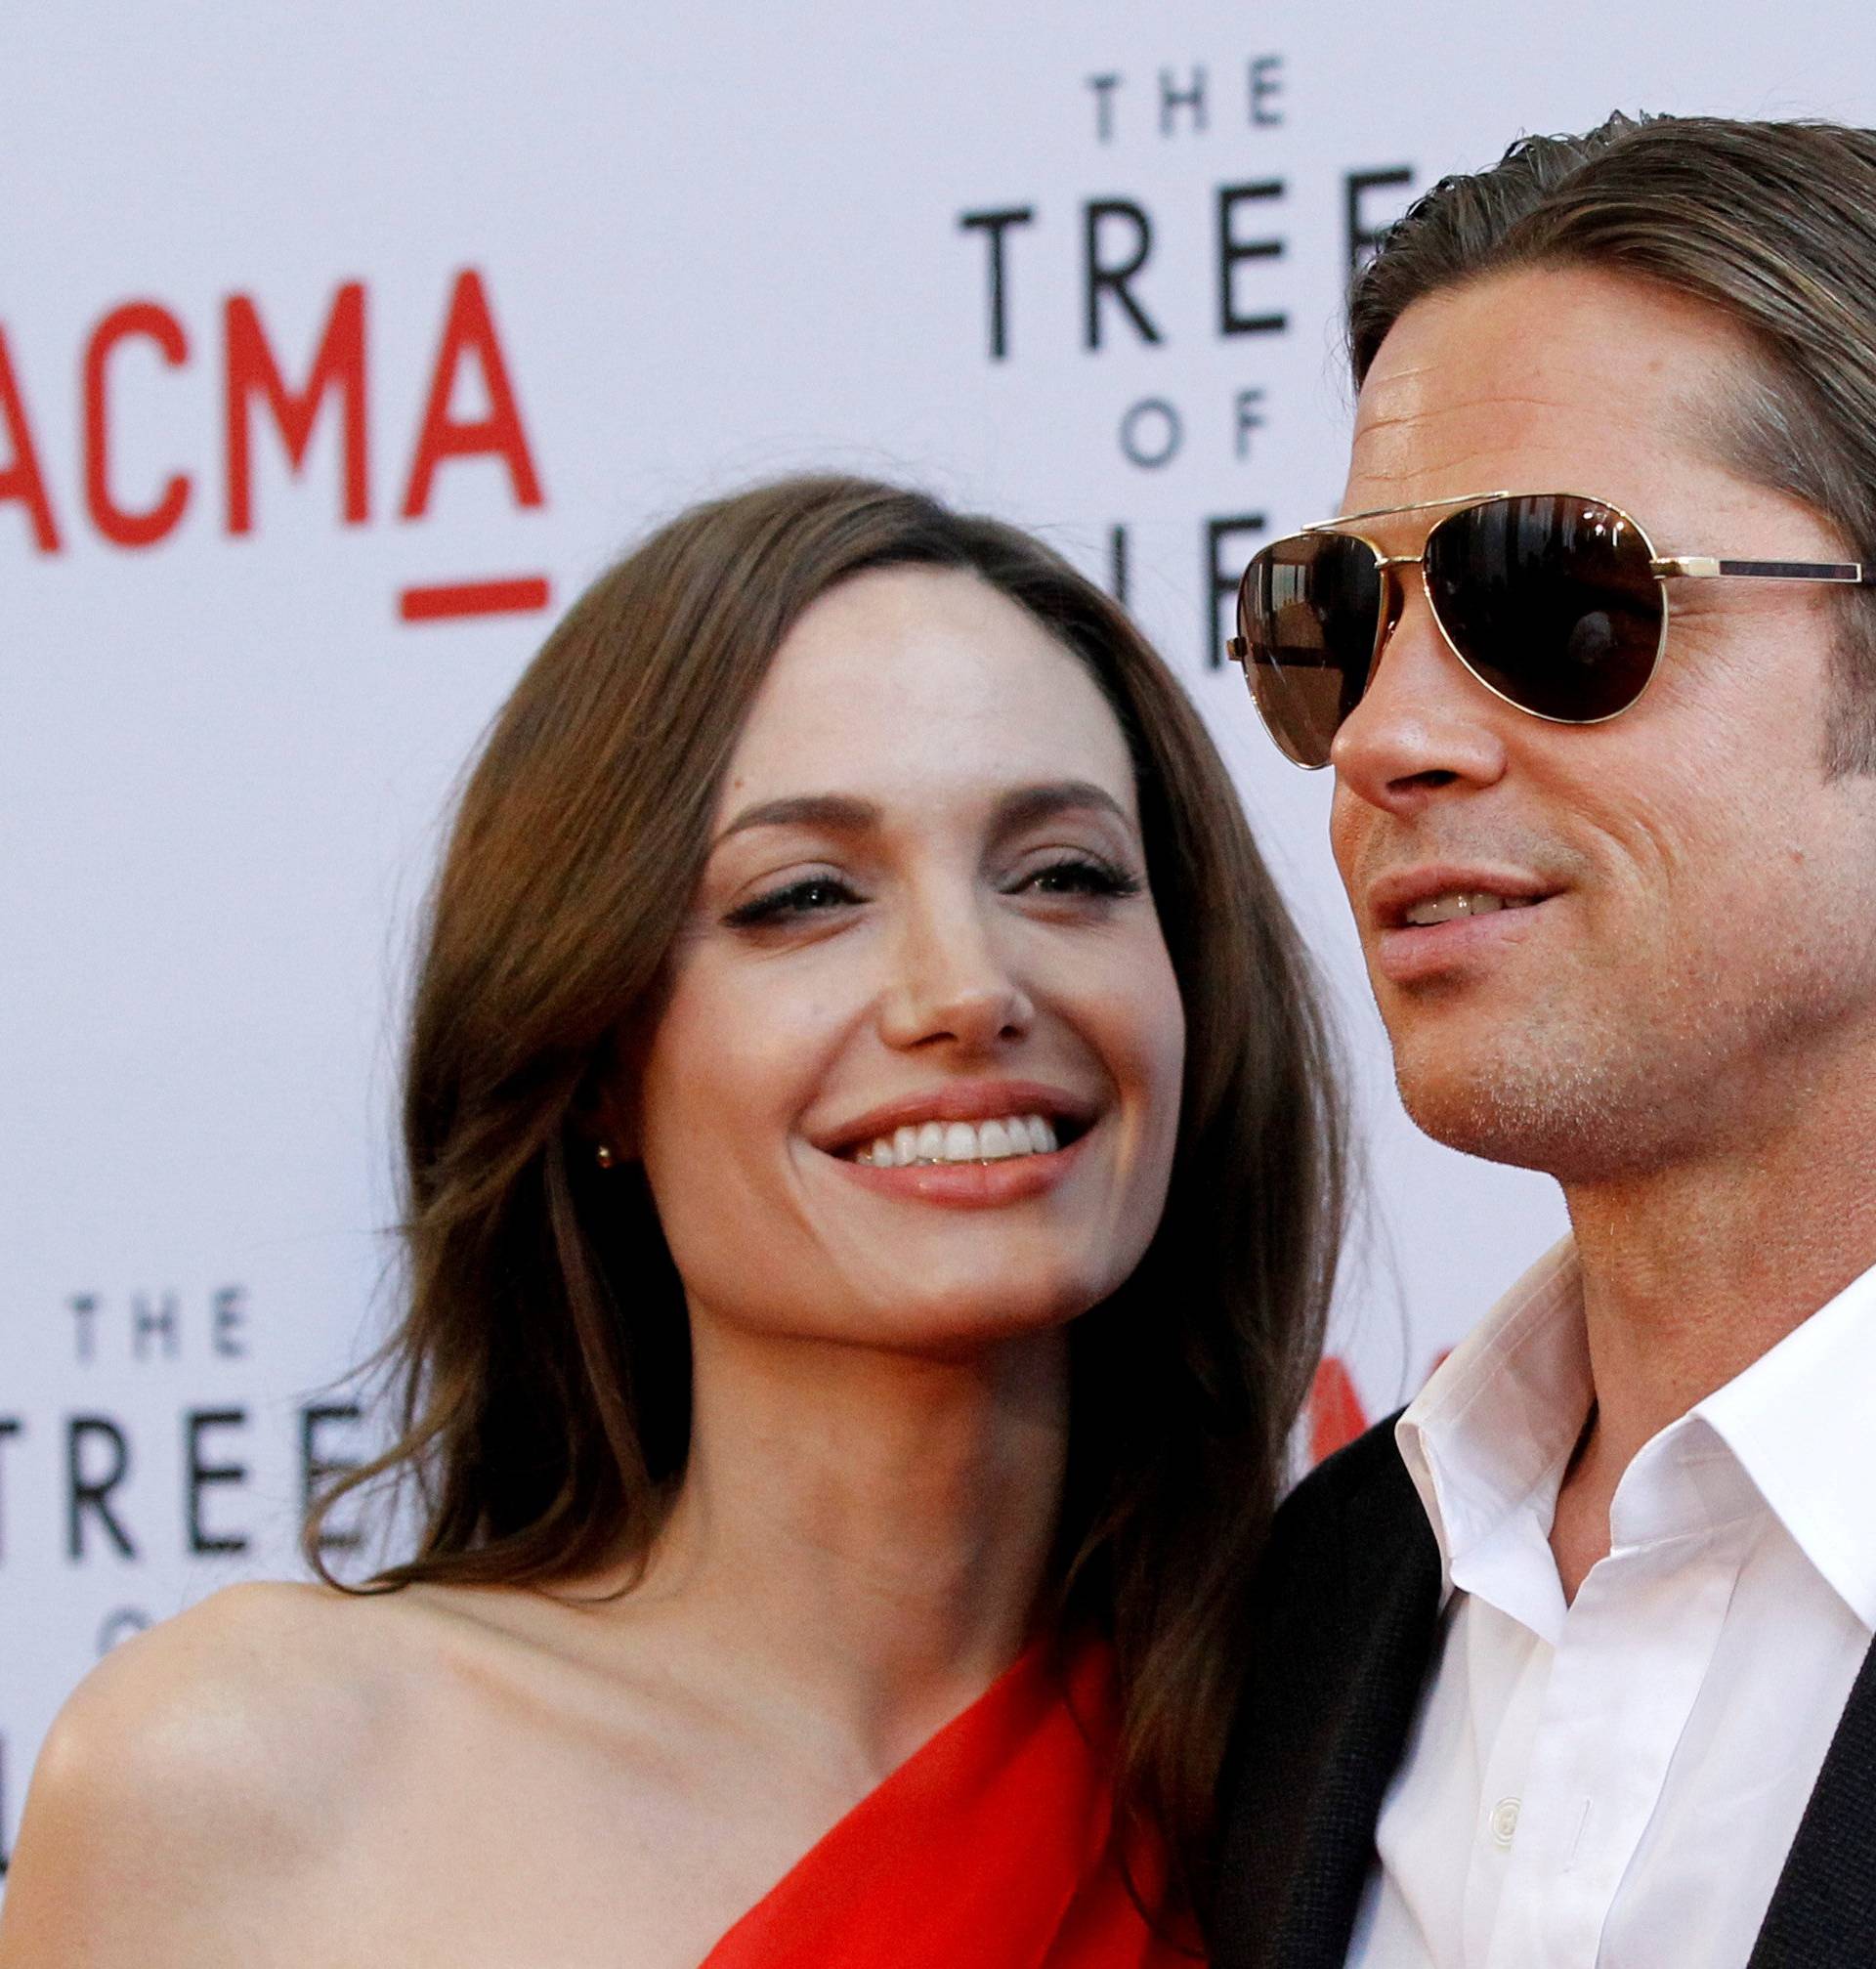 FILE PHOTO: Pitt and Jolie pose at the premiere of "The Tree of Life" at LACMA in Los Angeles